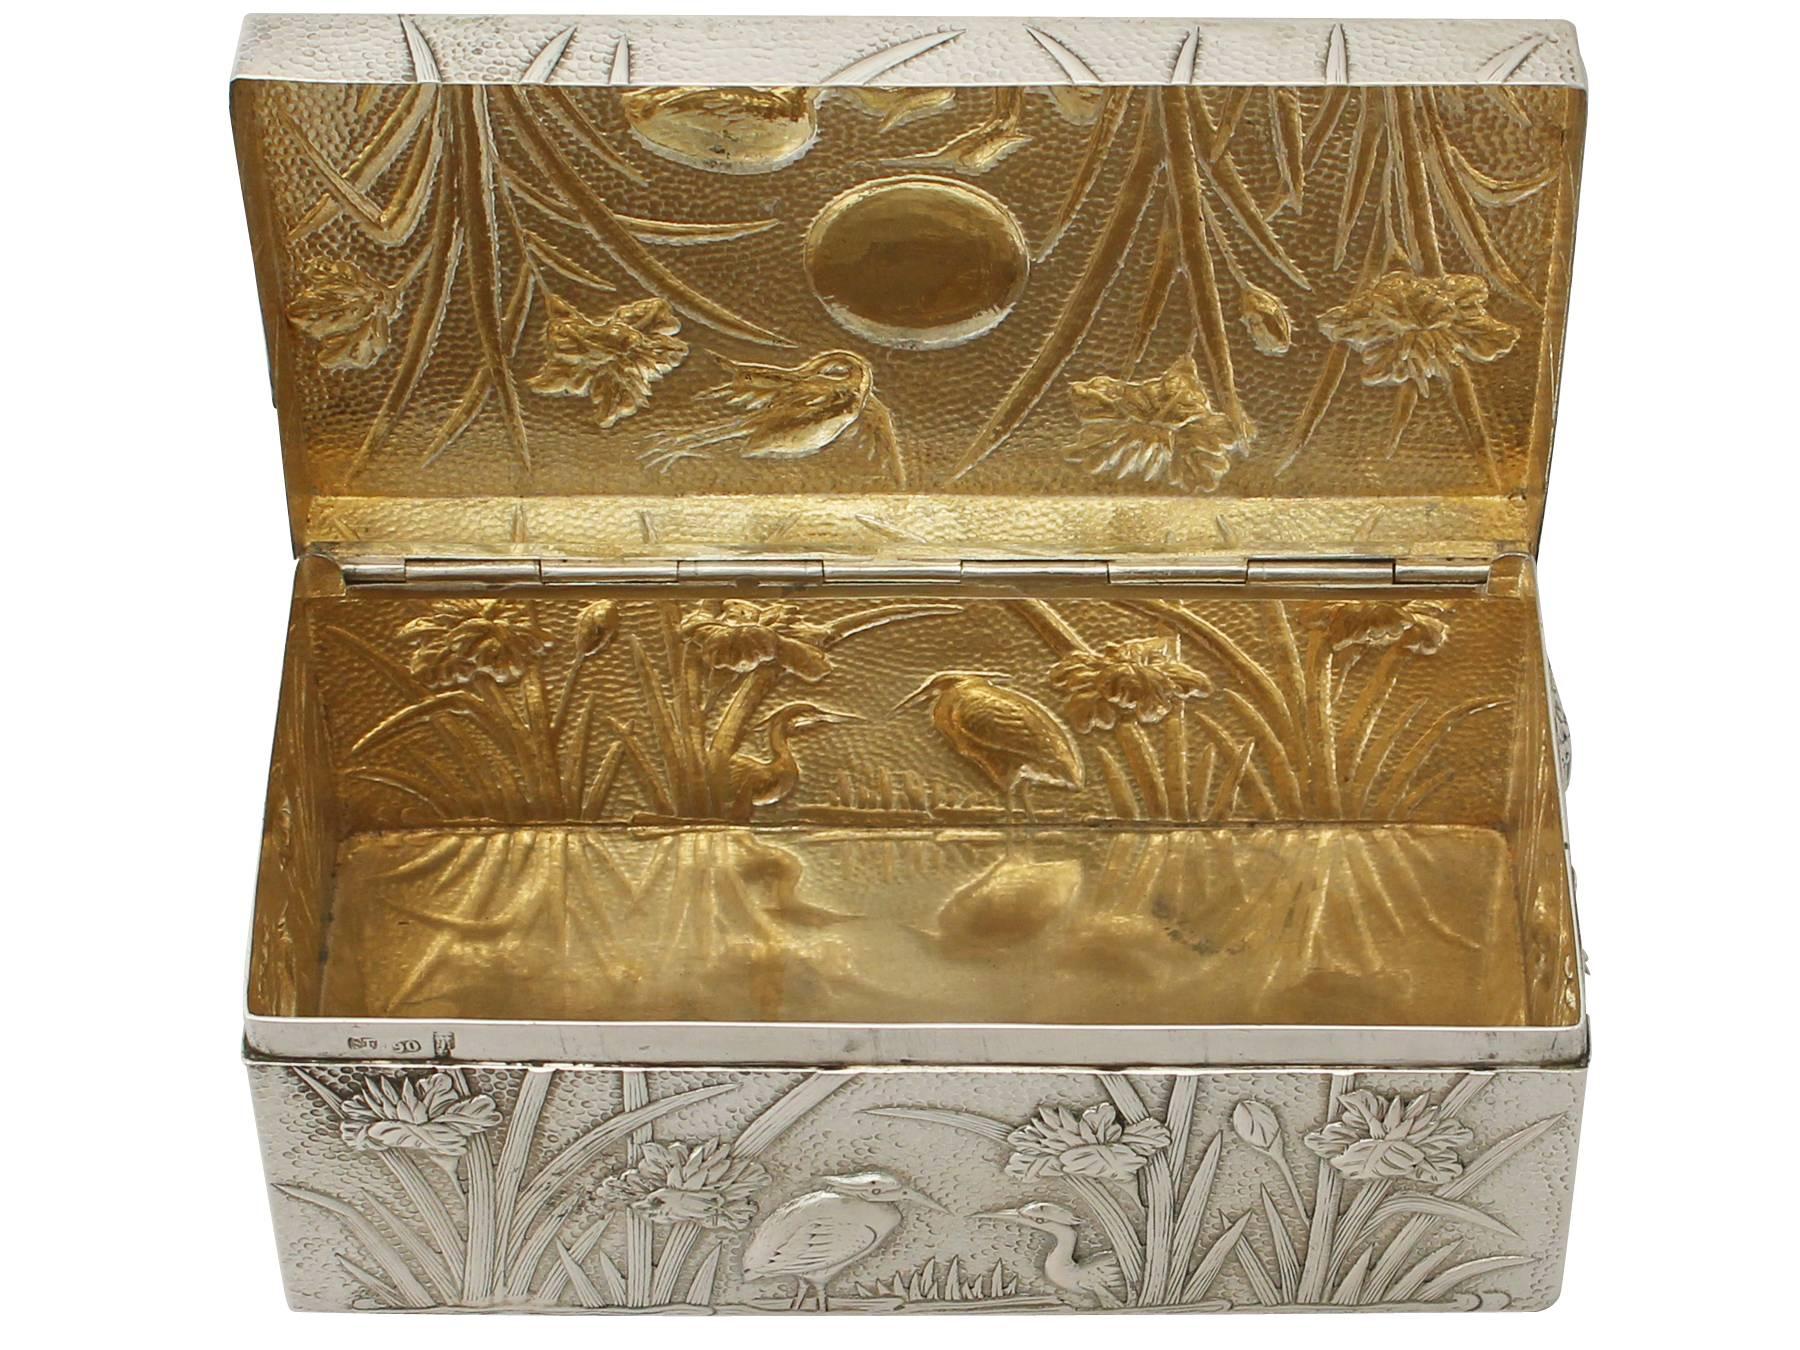 Early 20th Century Chinese Export Silver Box - Antique Circa 1900